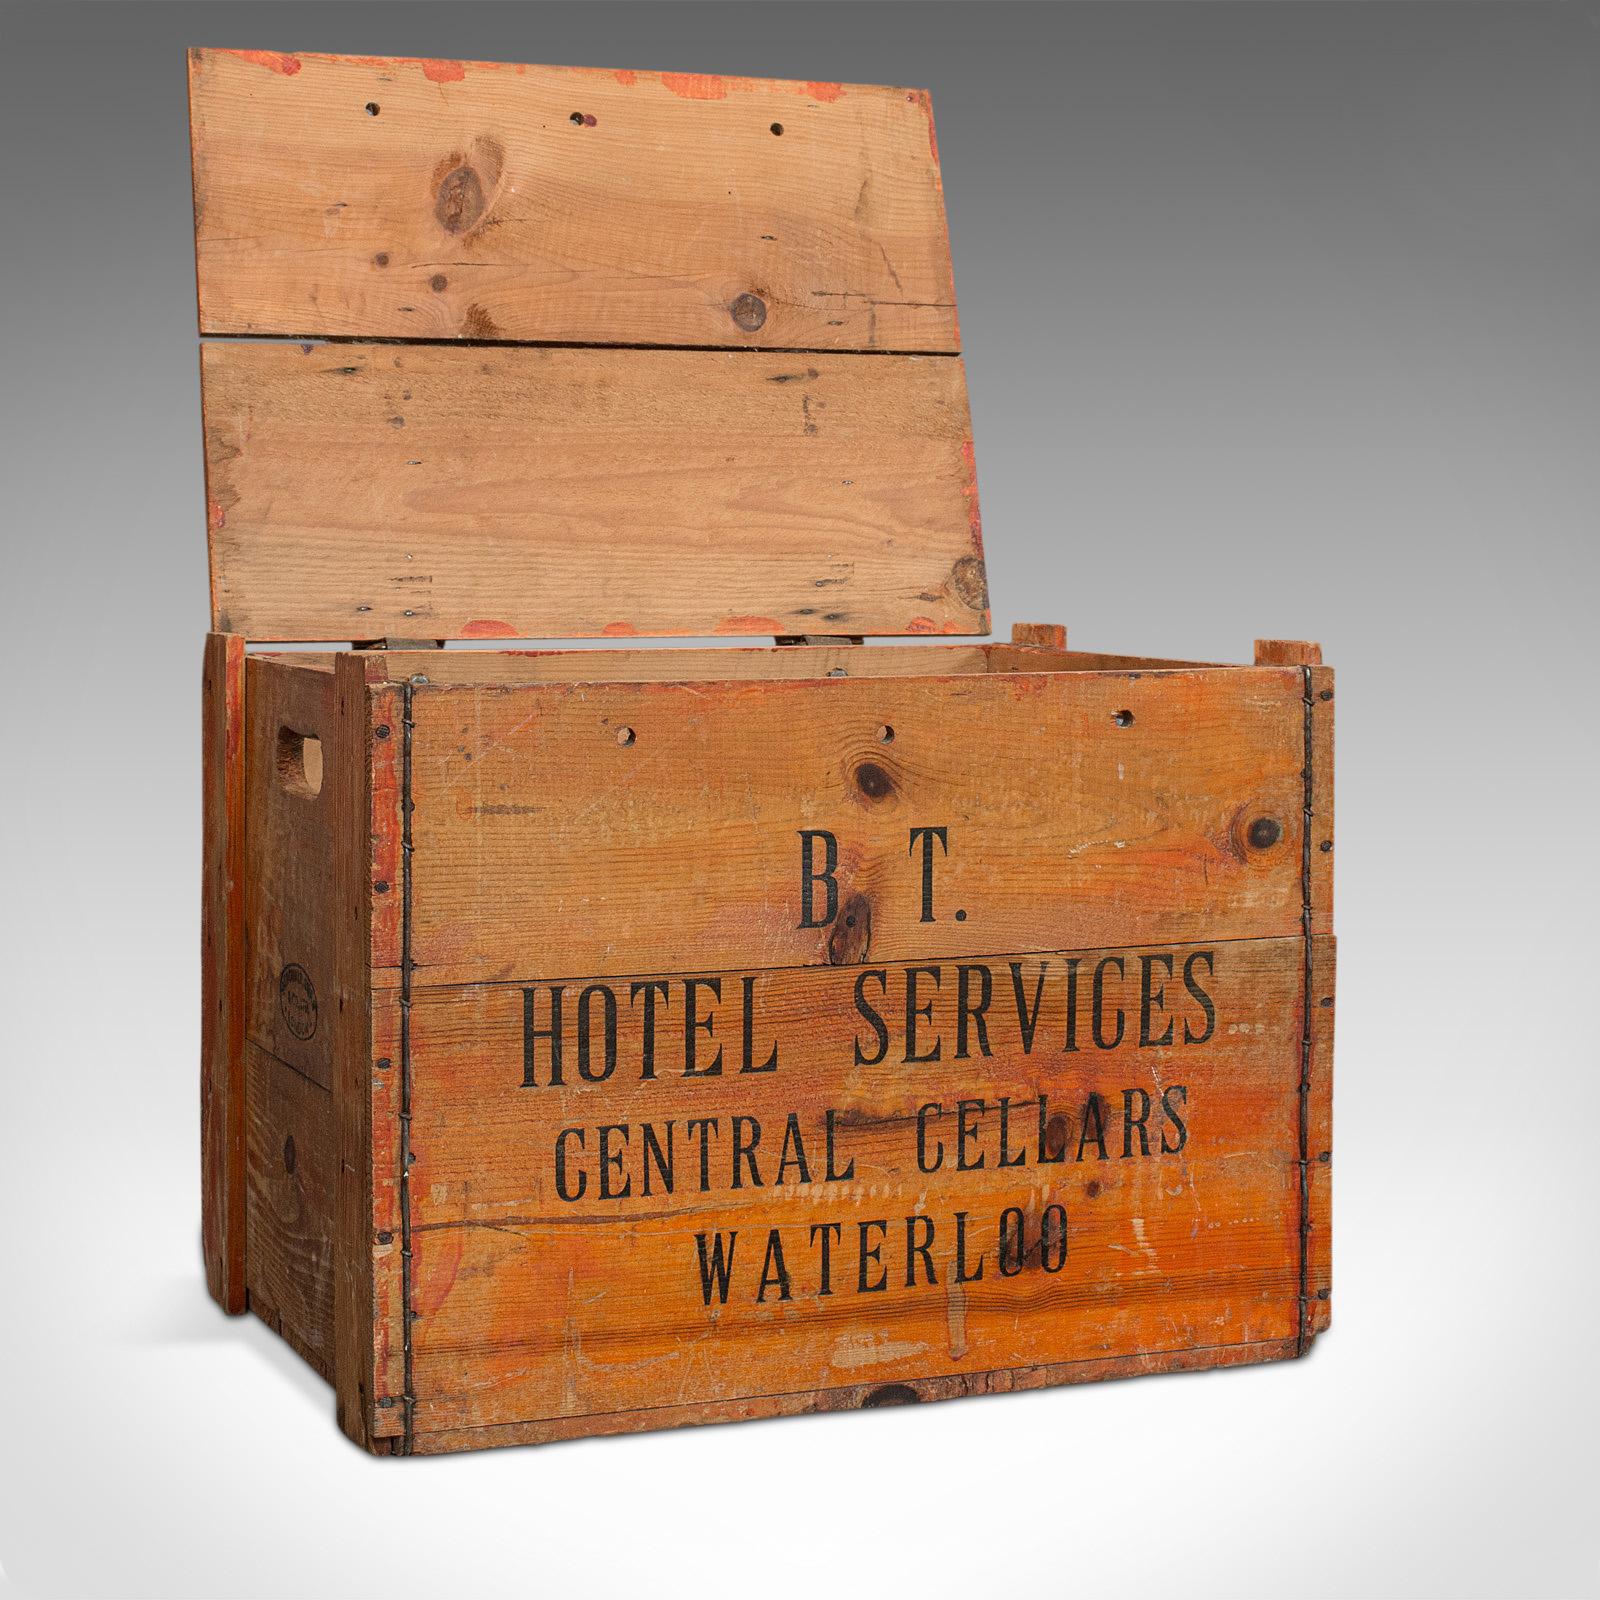 This is a vintage champagne case. An English, pine service chest or wine carrier, dating to the mid-20th century, circa 1950.

Fascinating commercial champagne case
Displays a desirable aged patina
Pine staves in good order show fine grain